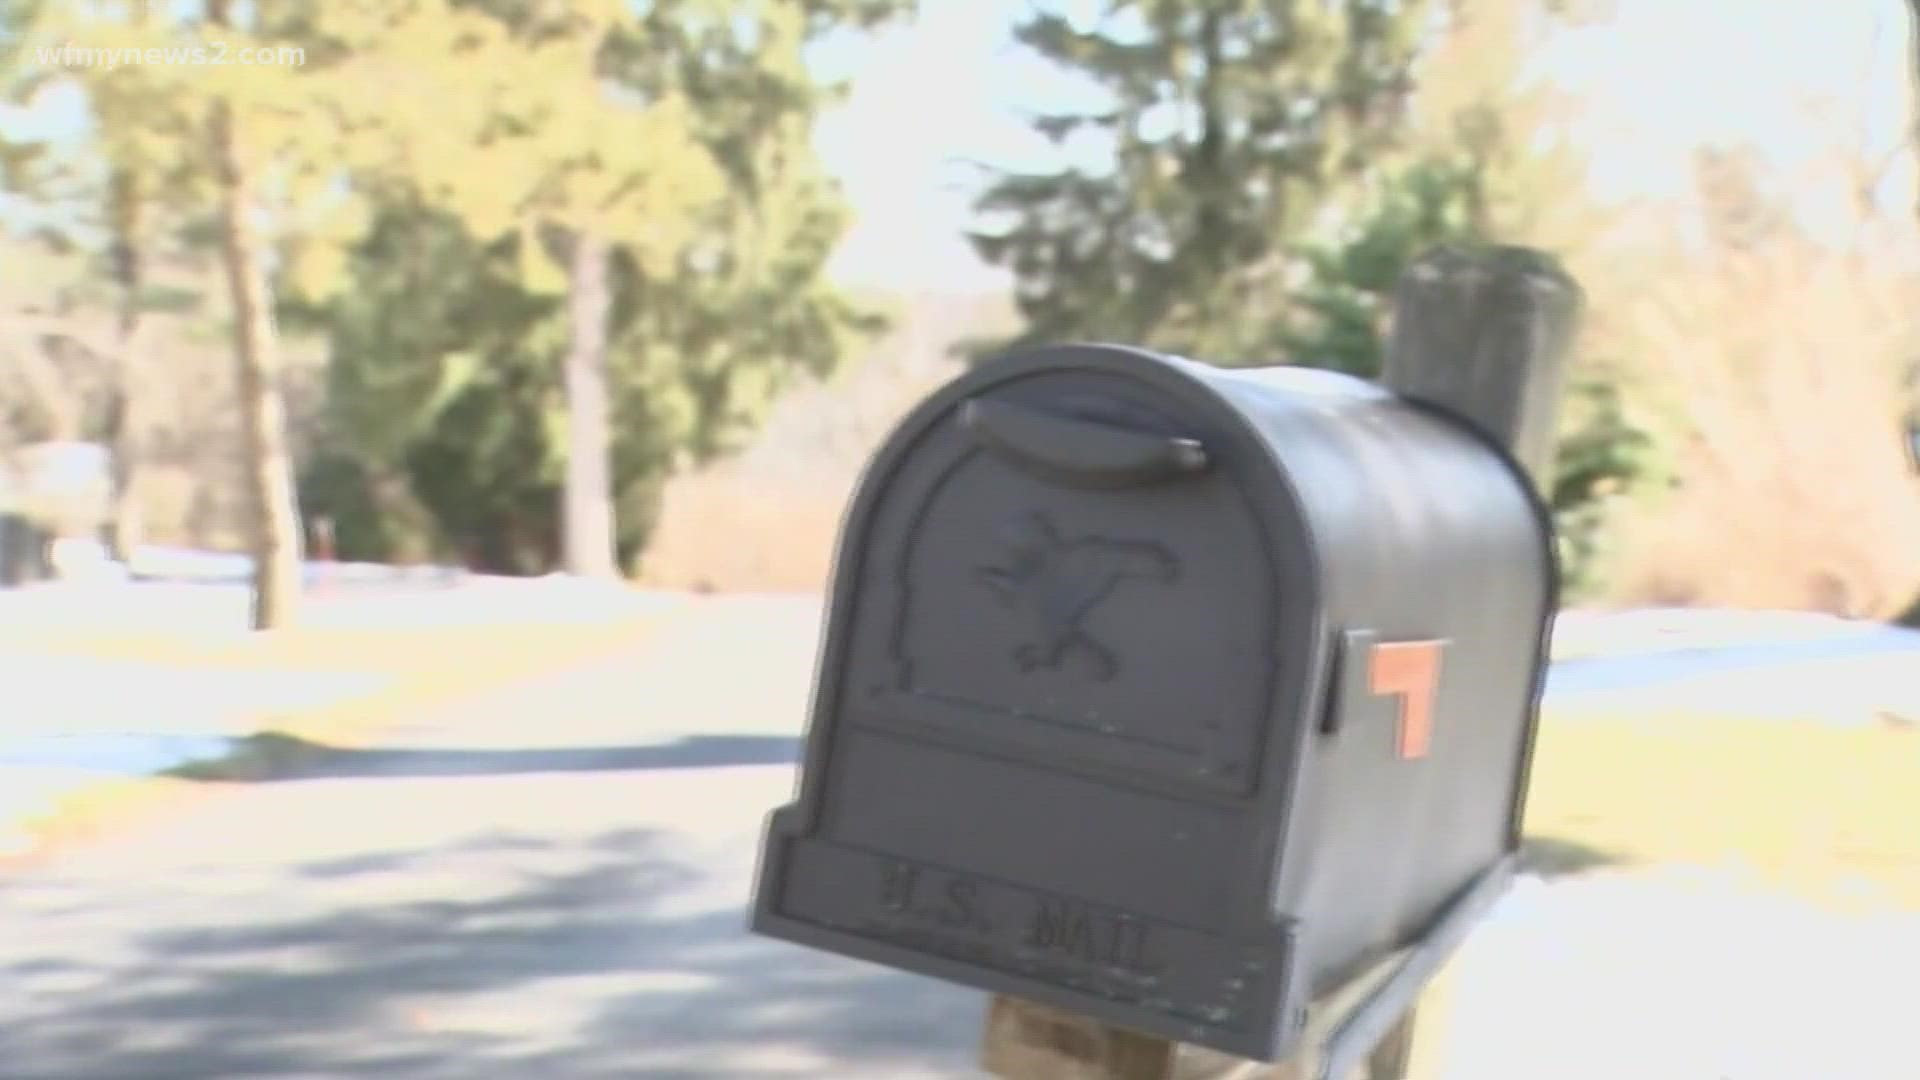 To protect yourself, police say hand your mail directly to the postal carrier.